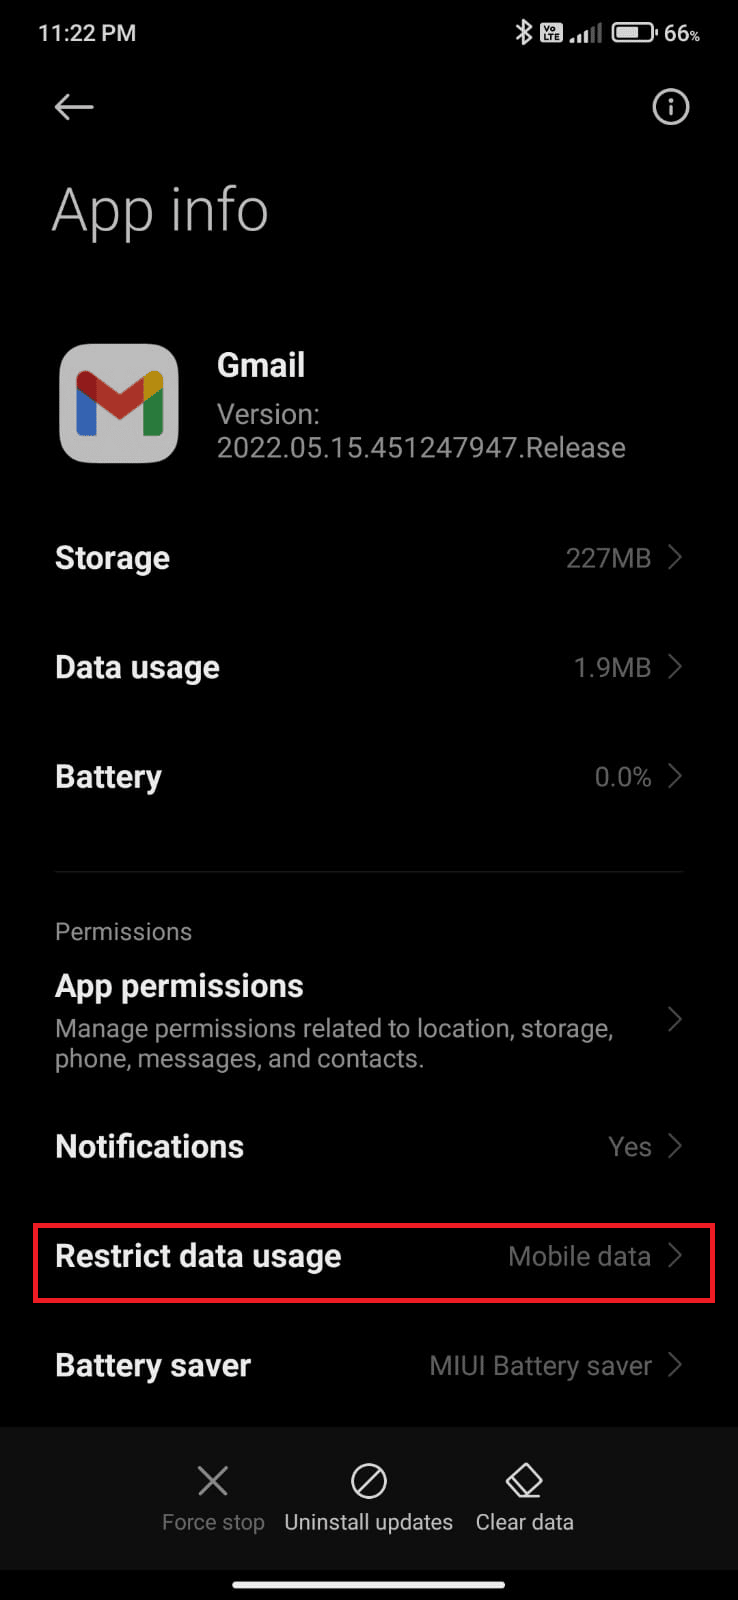 Then, tap on Restricted data usage.